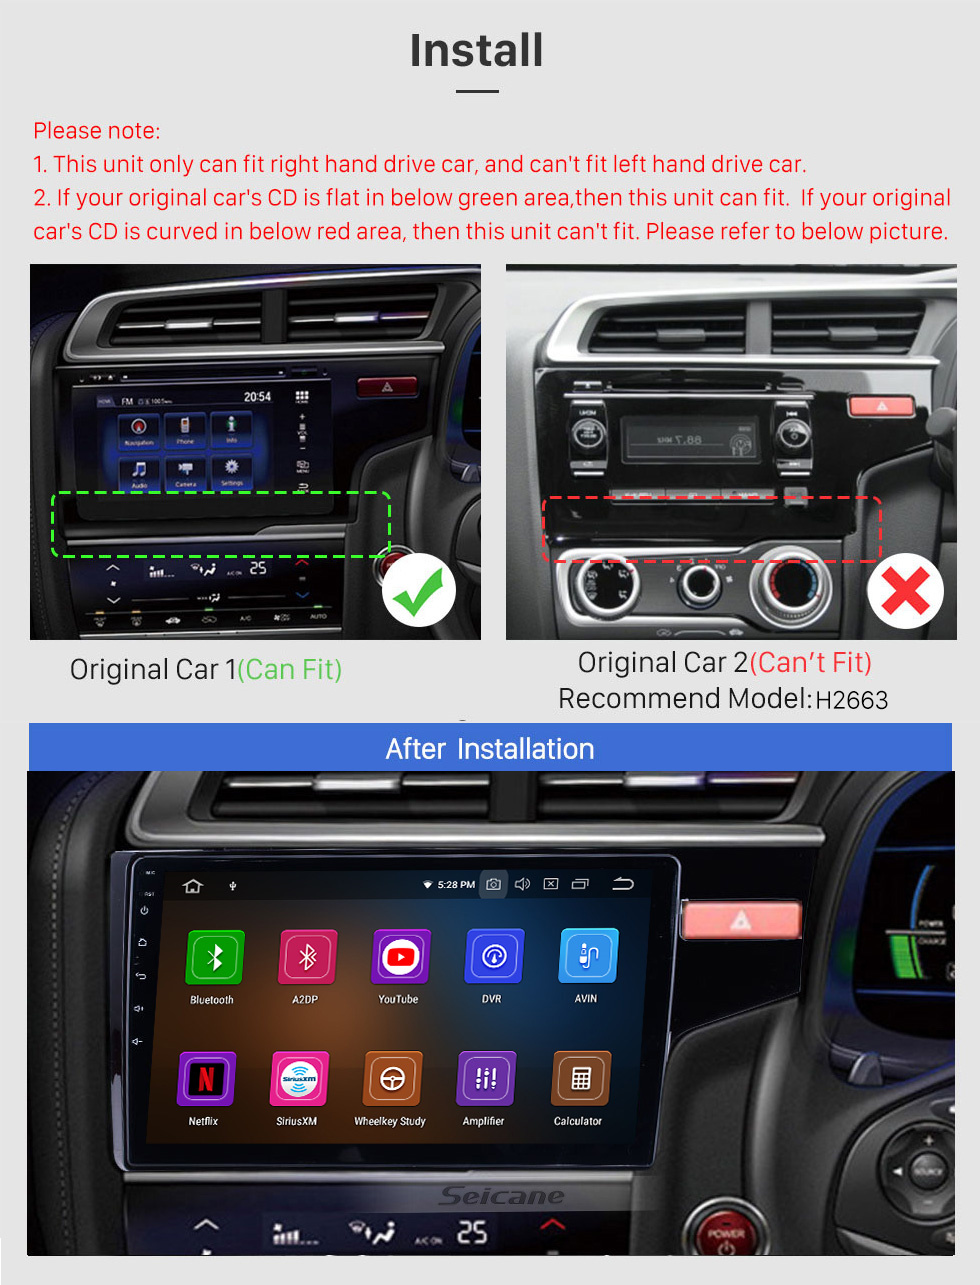 Seicane Aftermarket HD Touch Screen 2014 2015 2016 HONDA FIT RHD Android 11.0 Radio Replacement with GPS DVD Player 3G WiFi Bluetooth Music Mirror Link OBD2 Backup Camera DVR AUX USB SD 1080P Video 